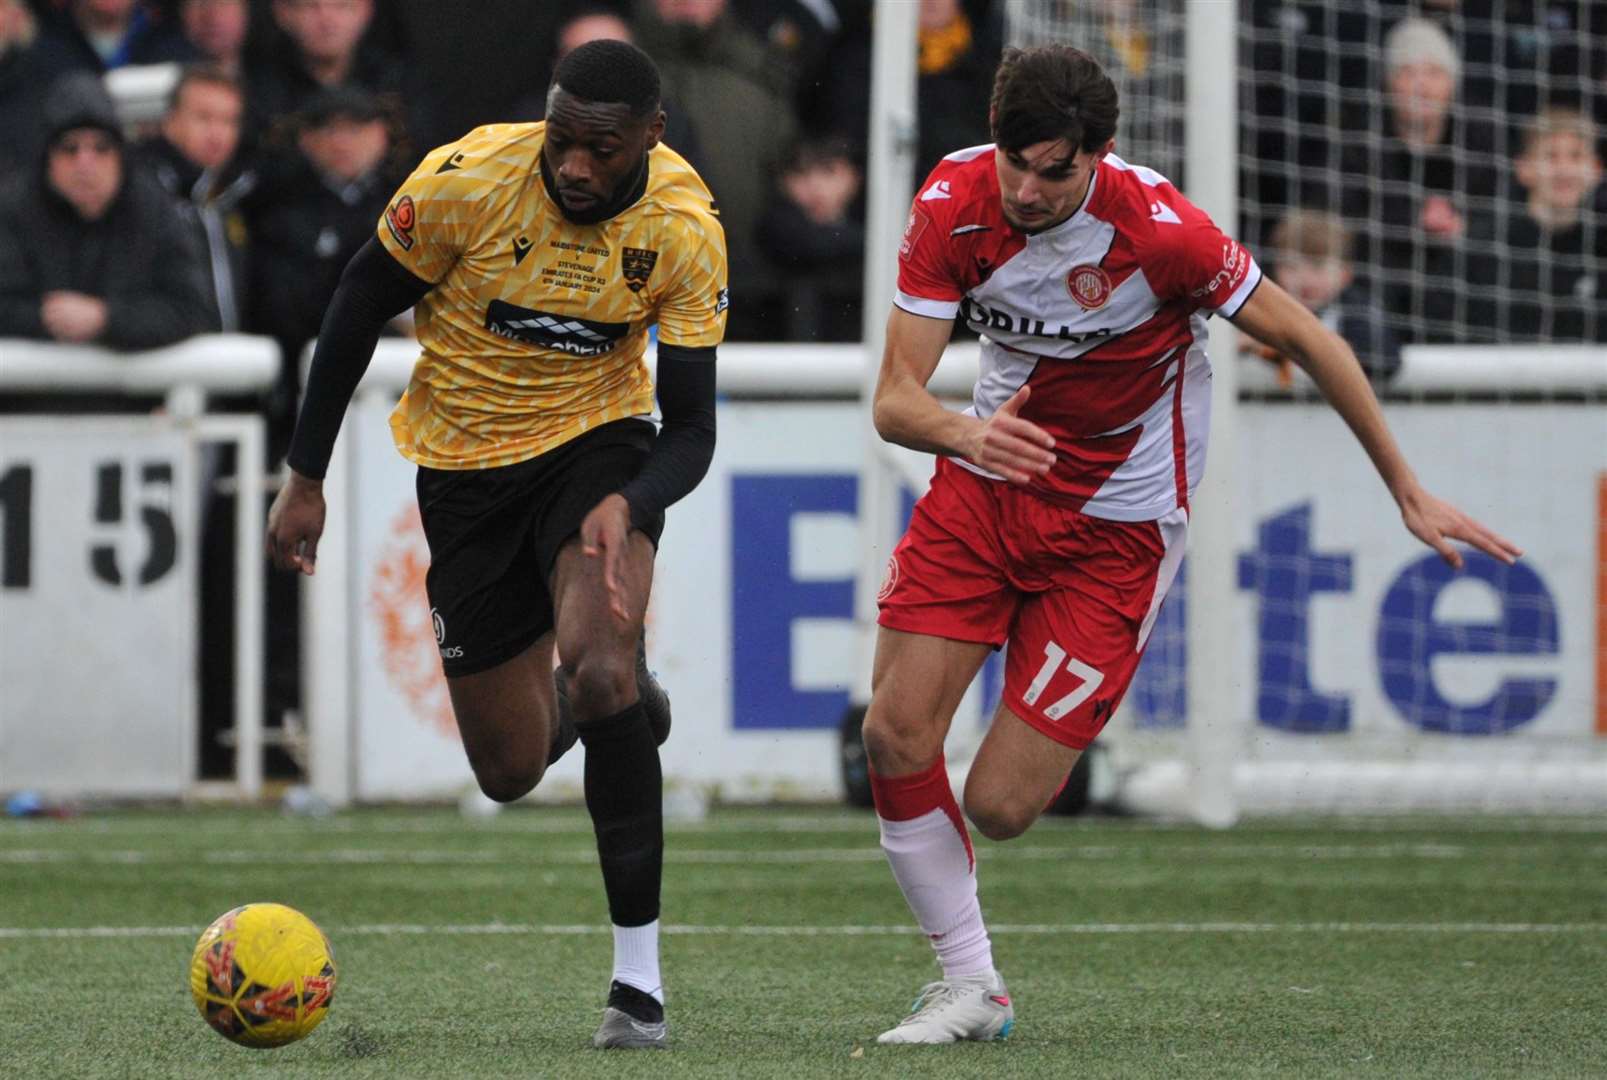 Maidstone’s Paul Appiah carries the ball forward against Stevenage on Saturday. Picture: Steve Terrell